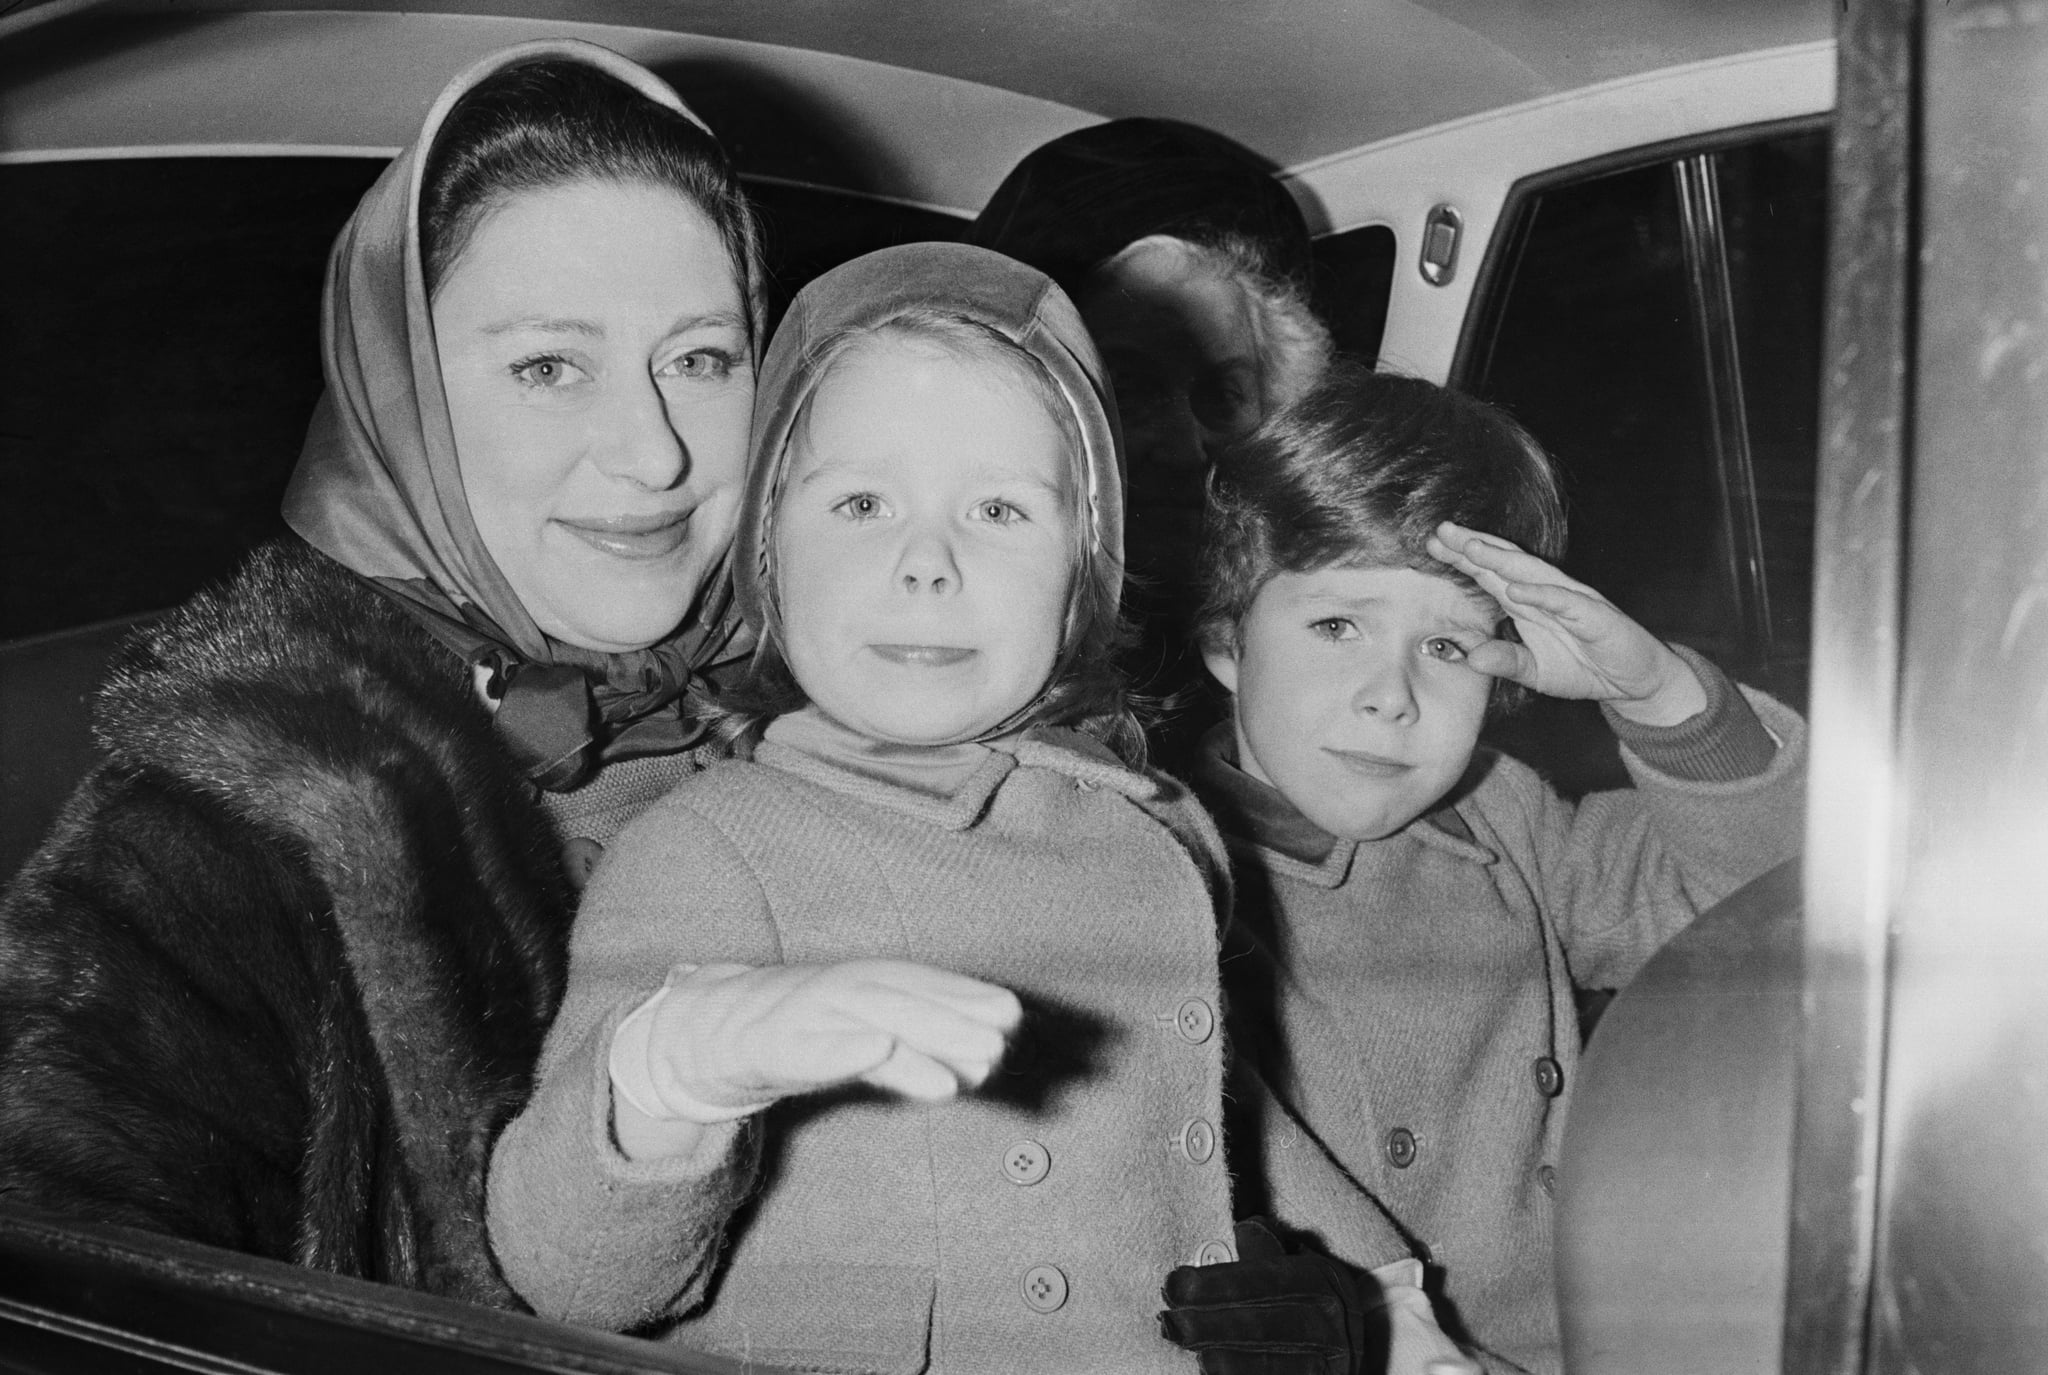 Princess Margaret, Countess of Snowdon (1930 - 2002) sits in the backseat of a car with her children David and Sarah and their nanny Mabel Anderson, London, UK, 23rd January 1968. (Photo by Terry Fincher/Daily Express/Getty Images)